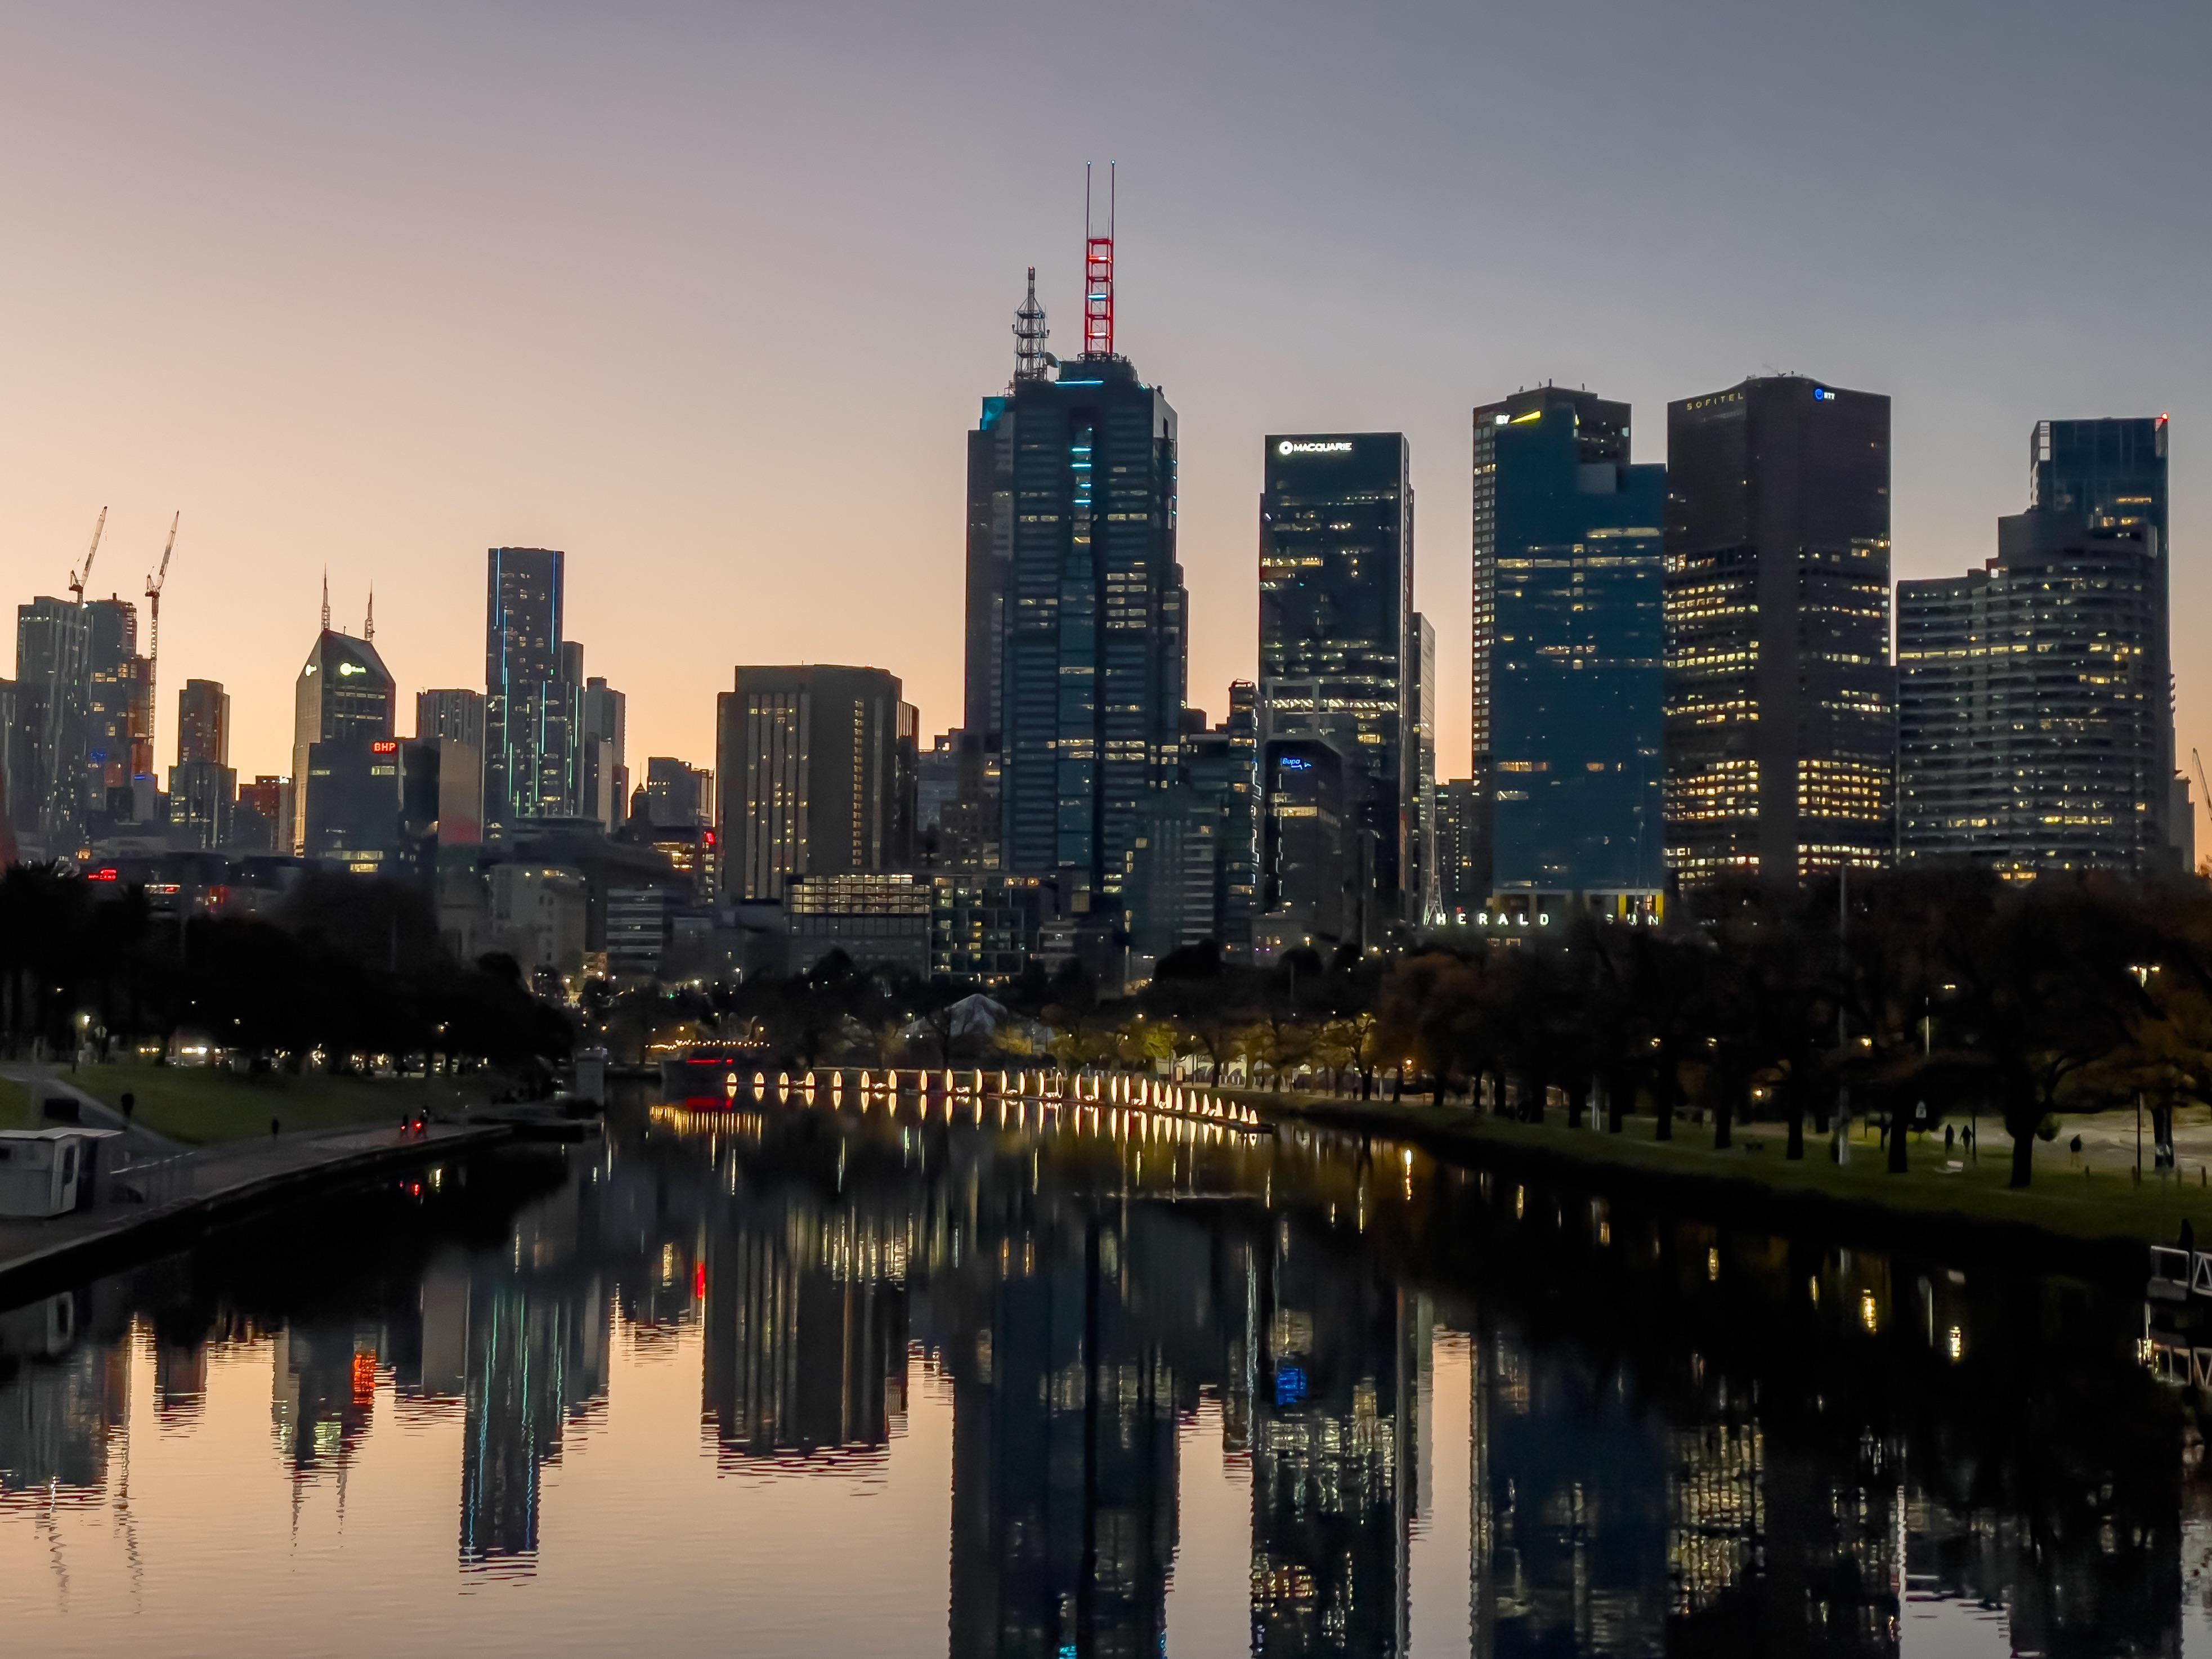 Melbourne k wallpapers for your desktop or mobile screen free and easy to download